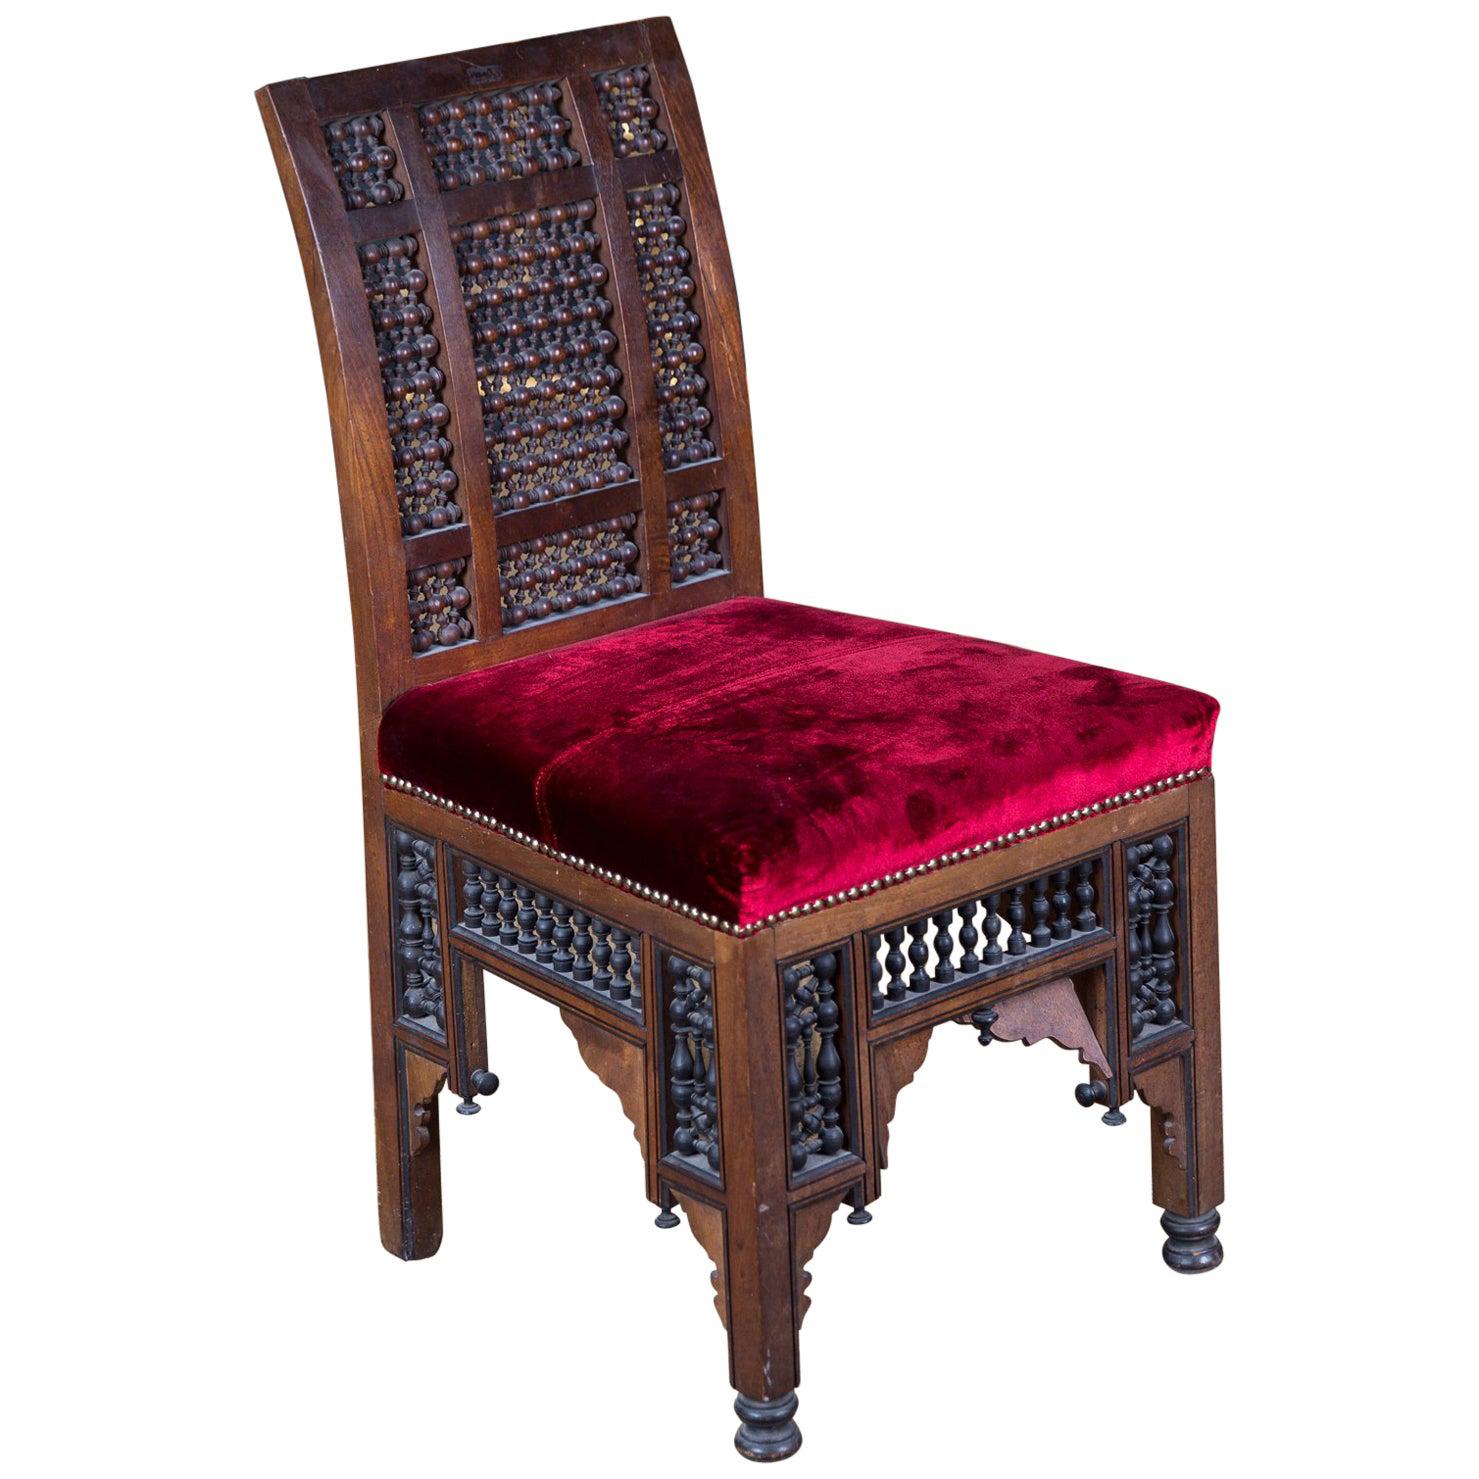 19th Century antique Oriental Chair with Inlaid Marakesh, 1900 beech carved For Sale